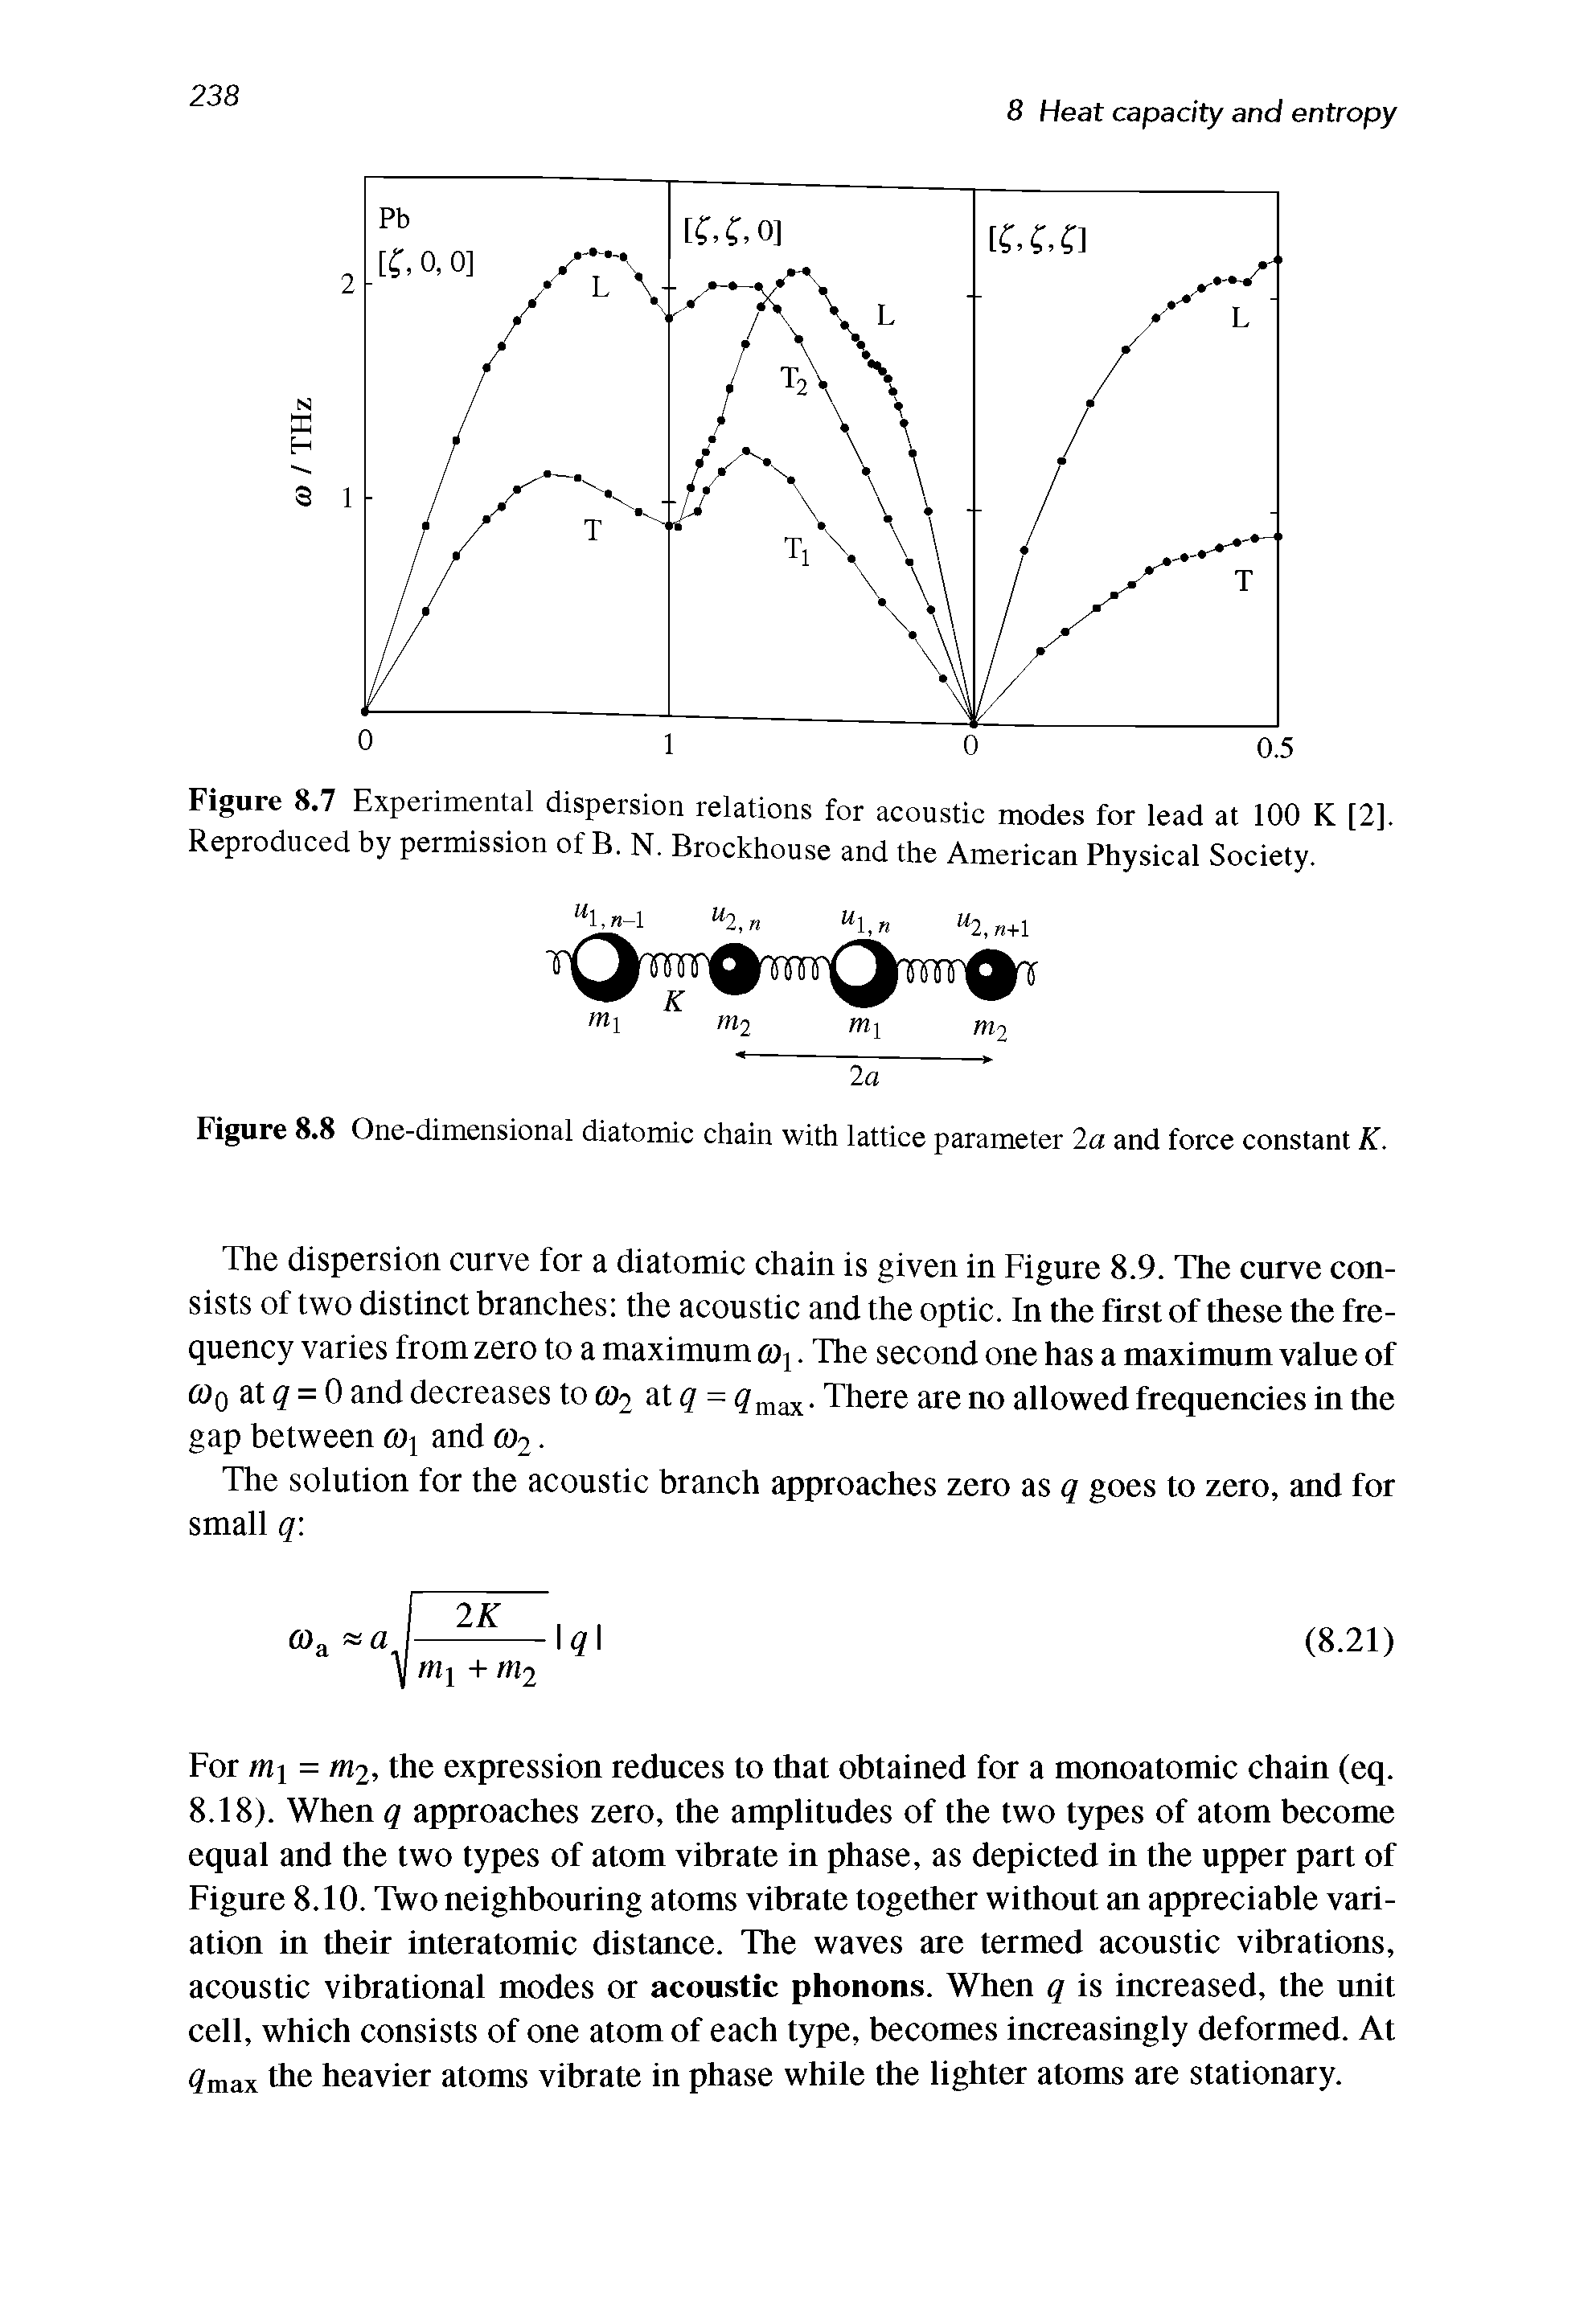 Figure 8.7 Experimental dispersion relations for acoustic modes for lead at 100 K [2], Reproduced by permission of B. N. Brockhouse and the American Physical Society.